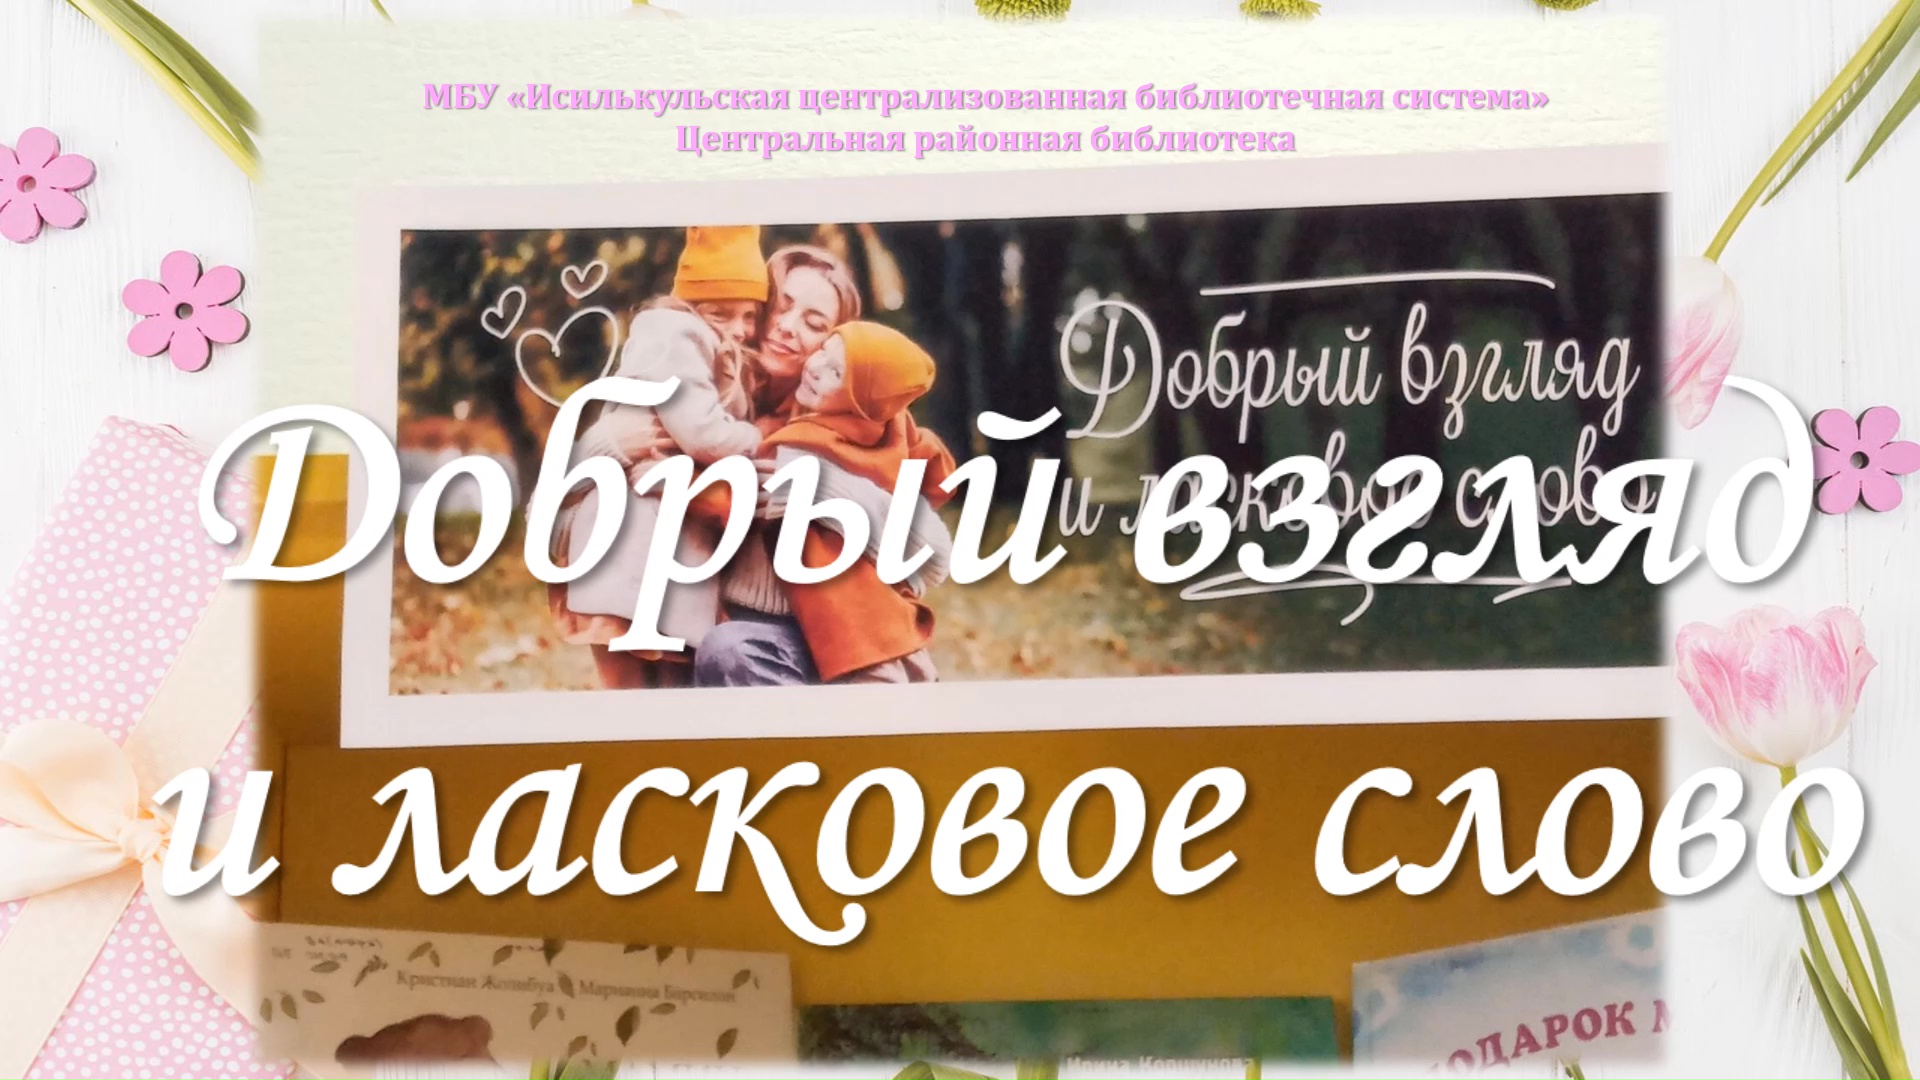 You are currently viewing Выставка “Добрый взгляд и ласковое слово”